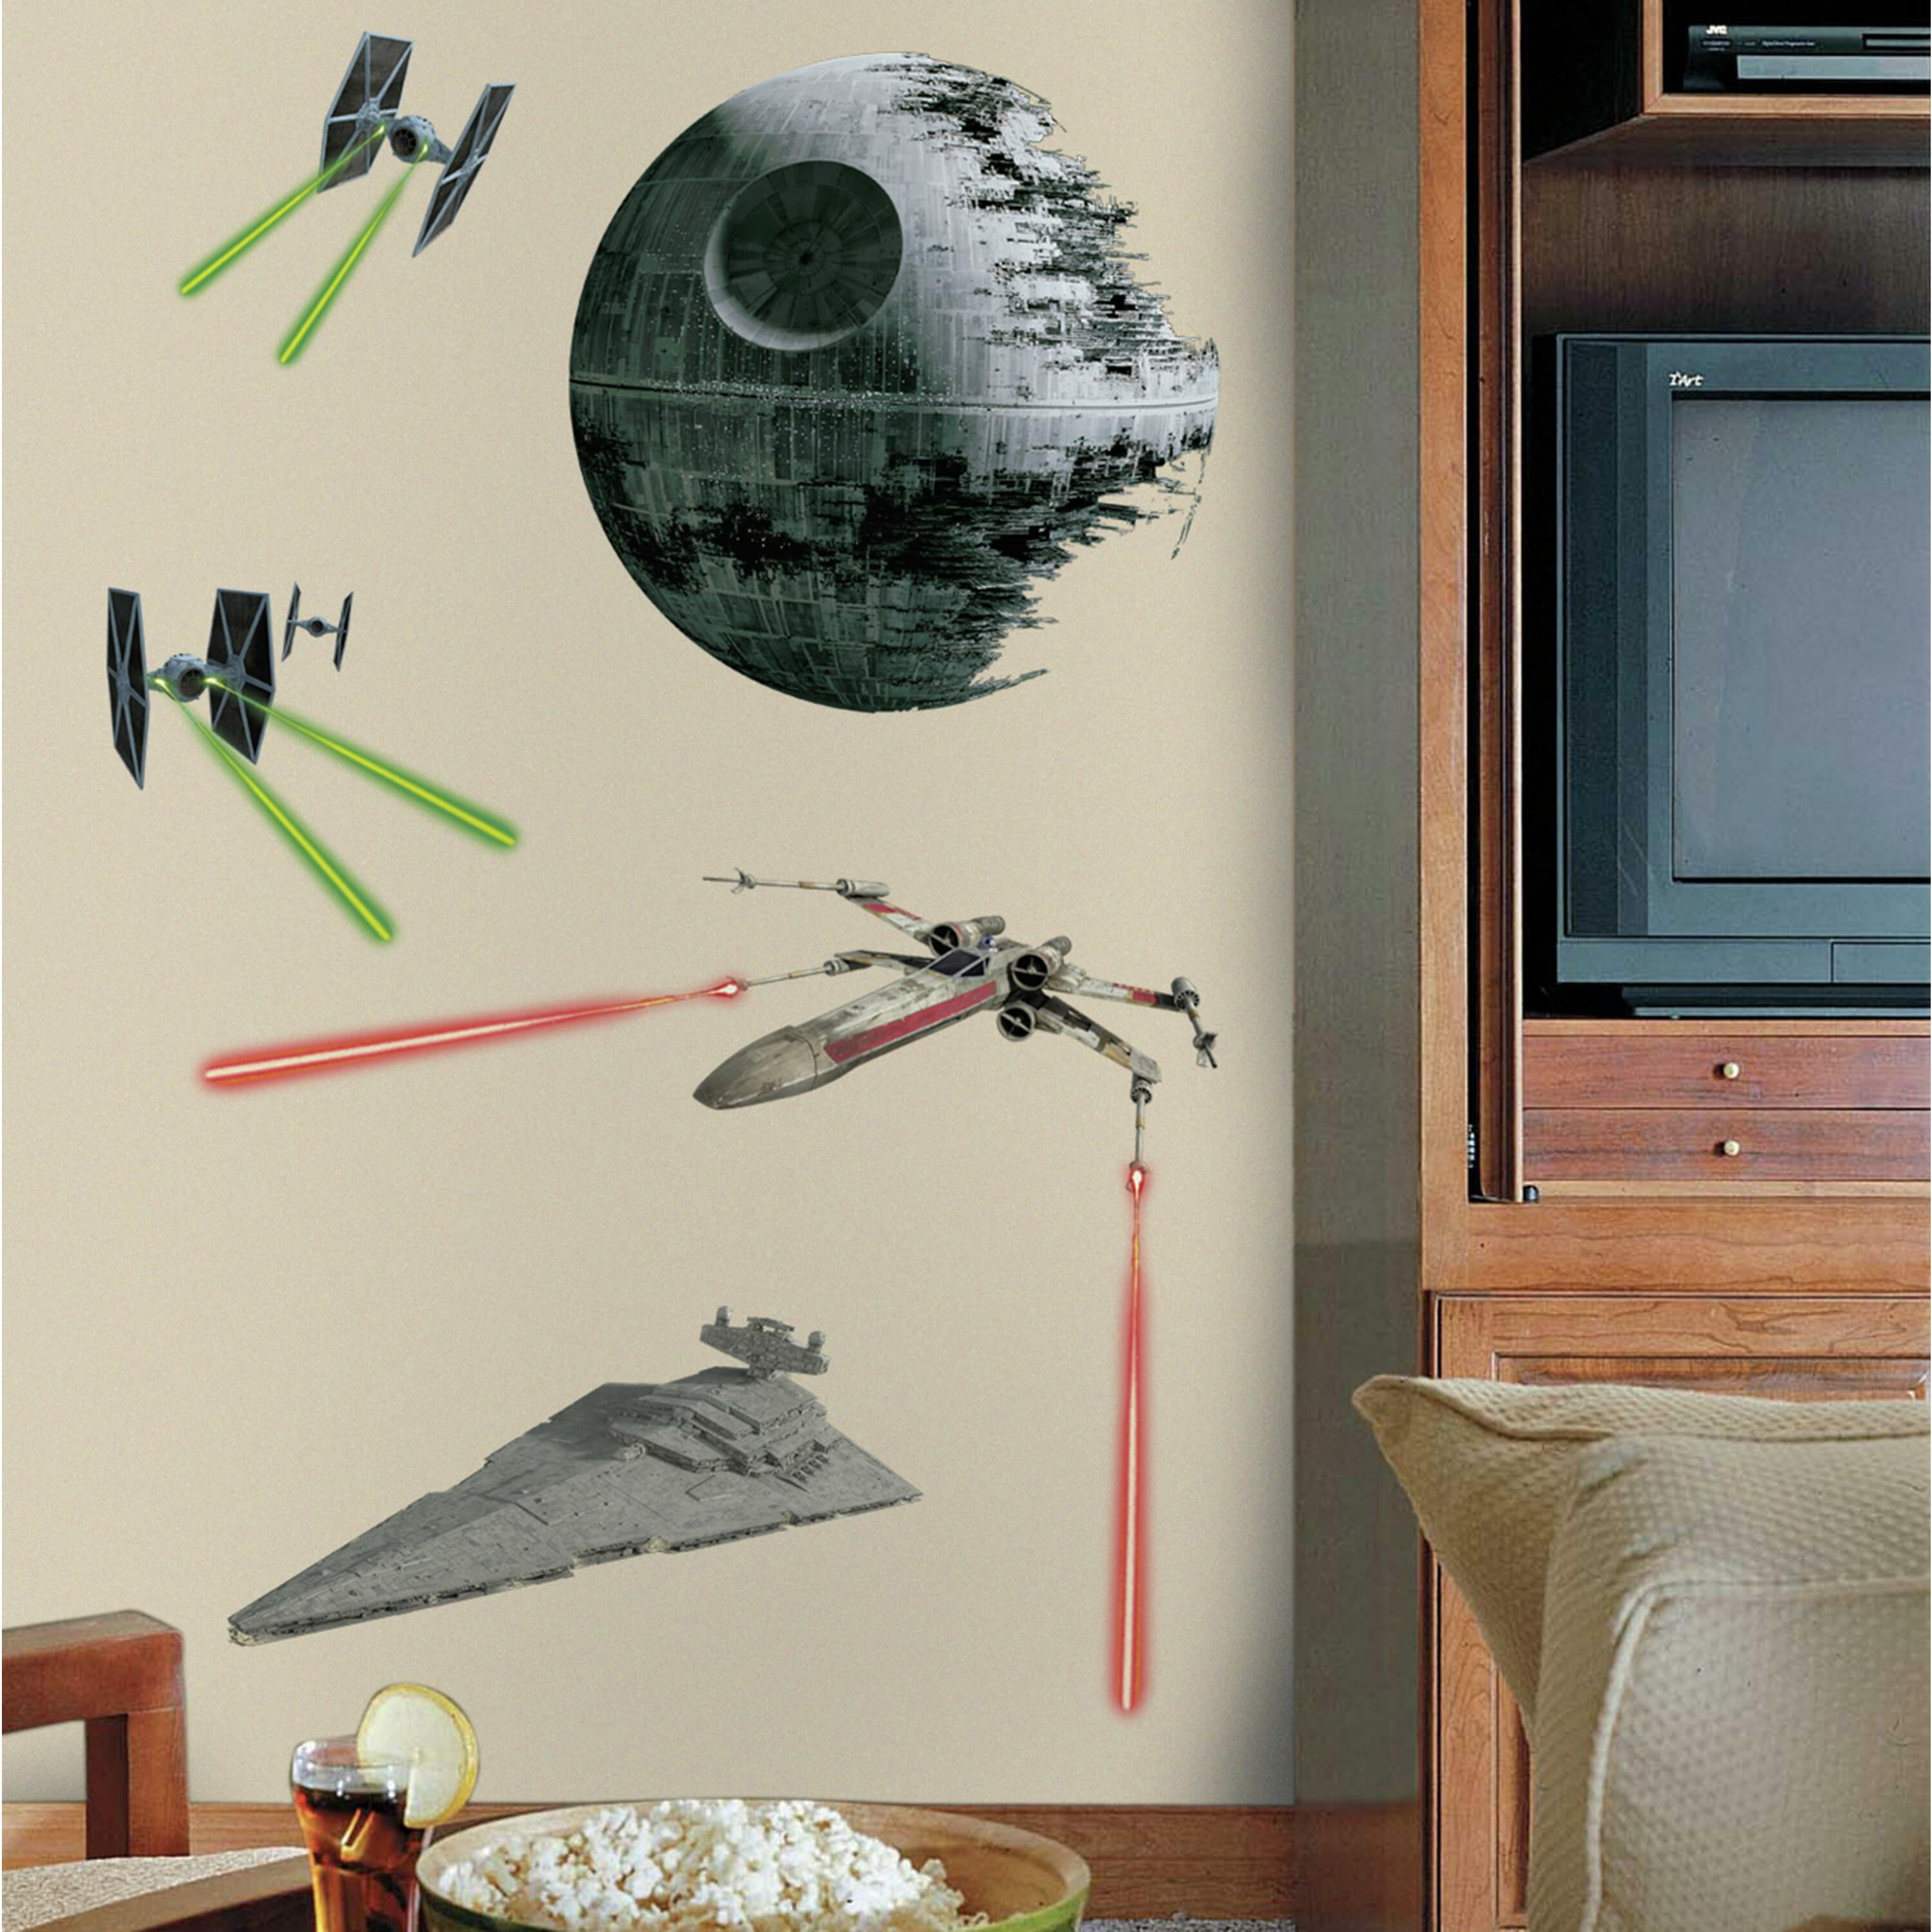 Star Wars Space Battle hole in the wall full colour feature sticker decal kids 